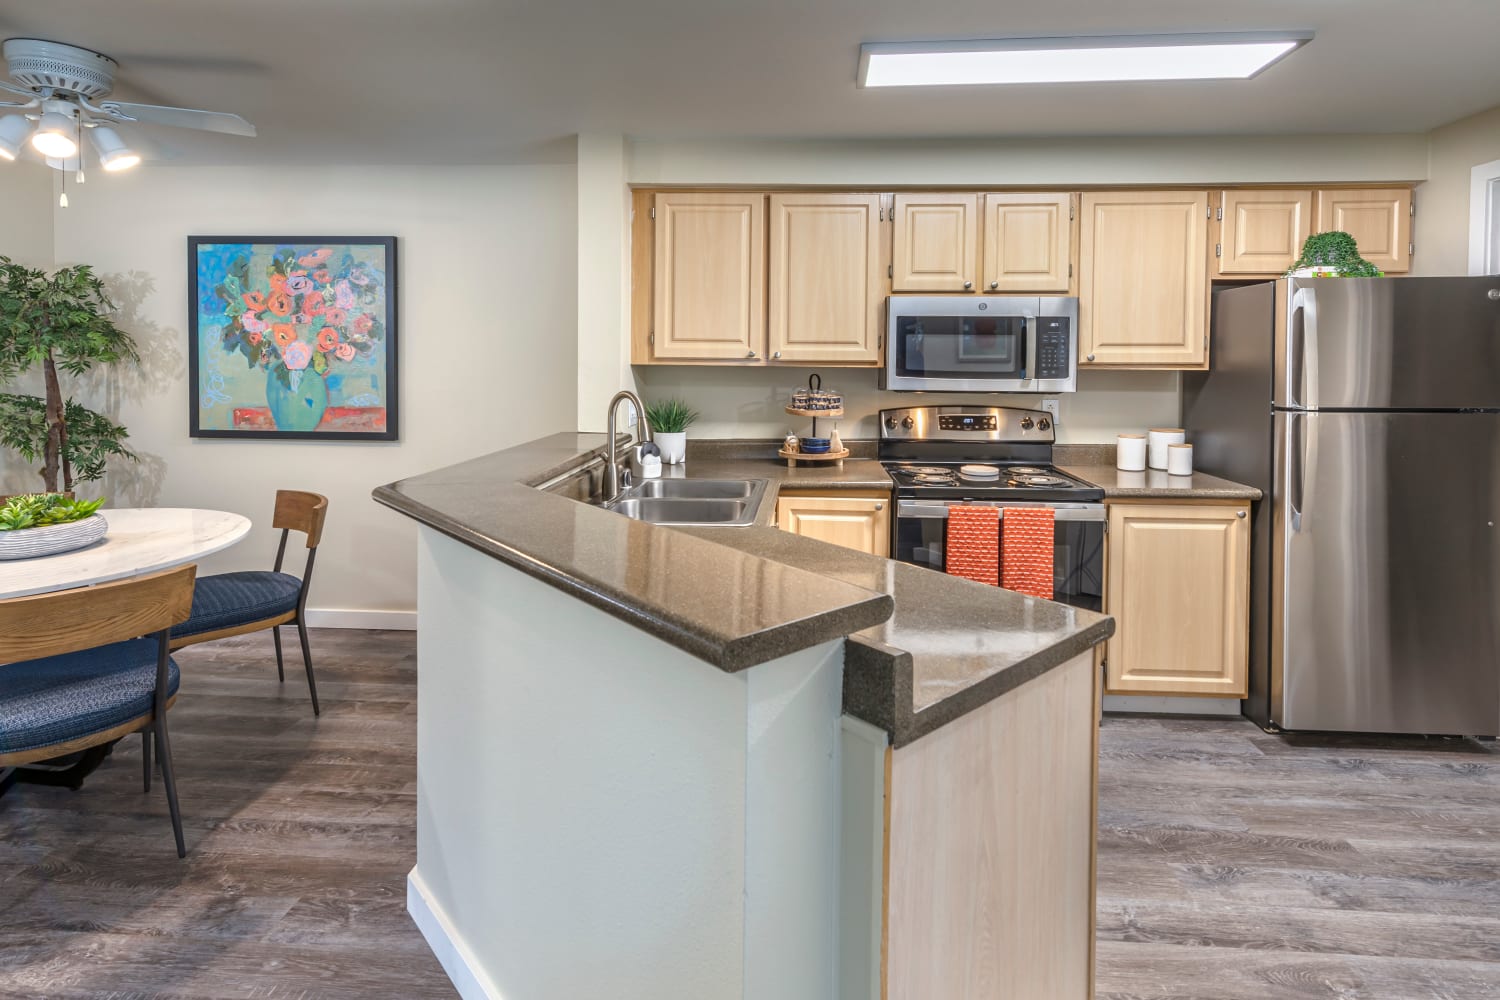 Kitchen and dining room area at Redmond Place Apartments in Redmond, Washington